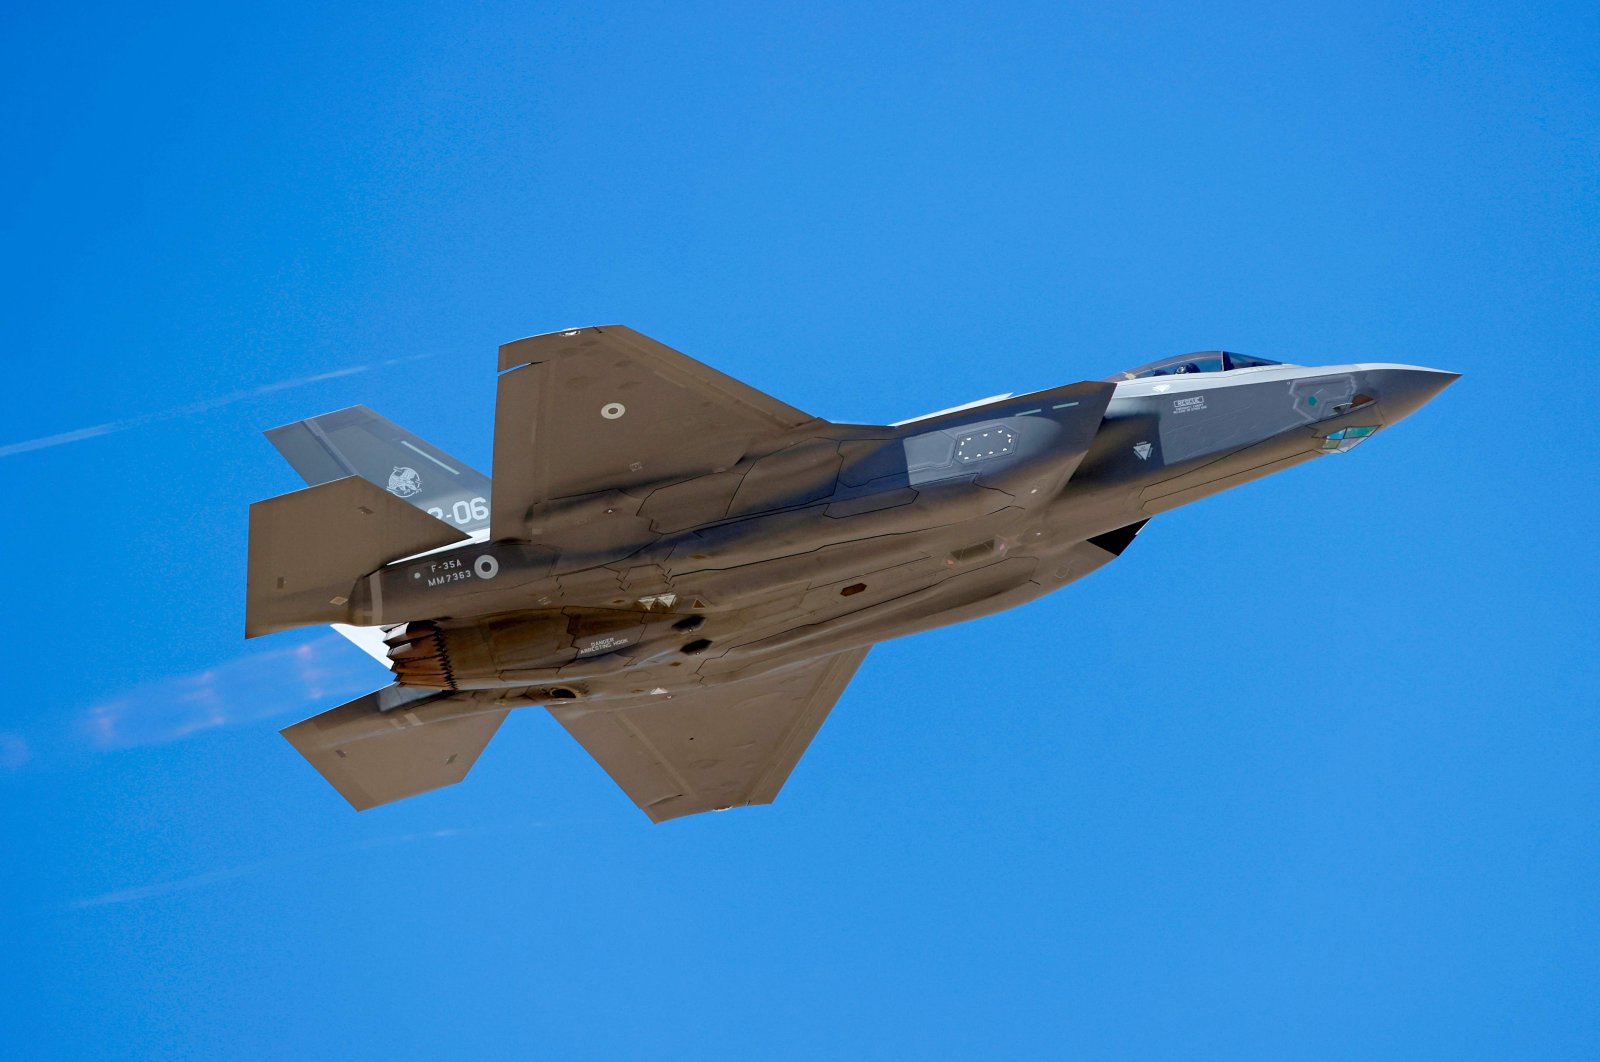 An Italian air force F-35 takes off during the "Blue Flag" multinational air defense exercise at the Ovda air force base, north of the Israeli city of Eilat, Oct. 24, 2021. (AFP Photo)